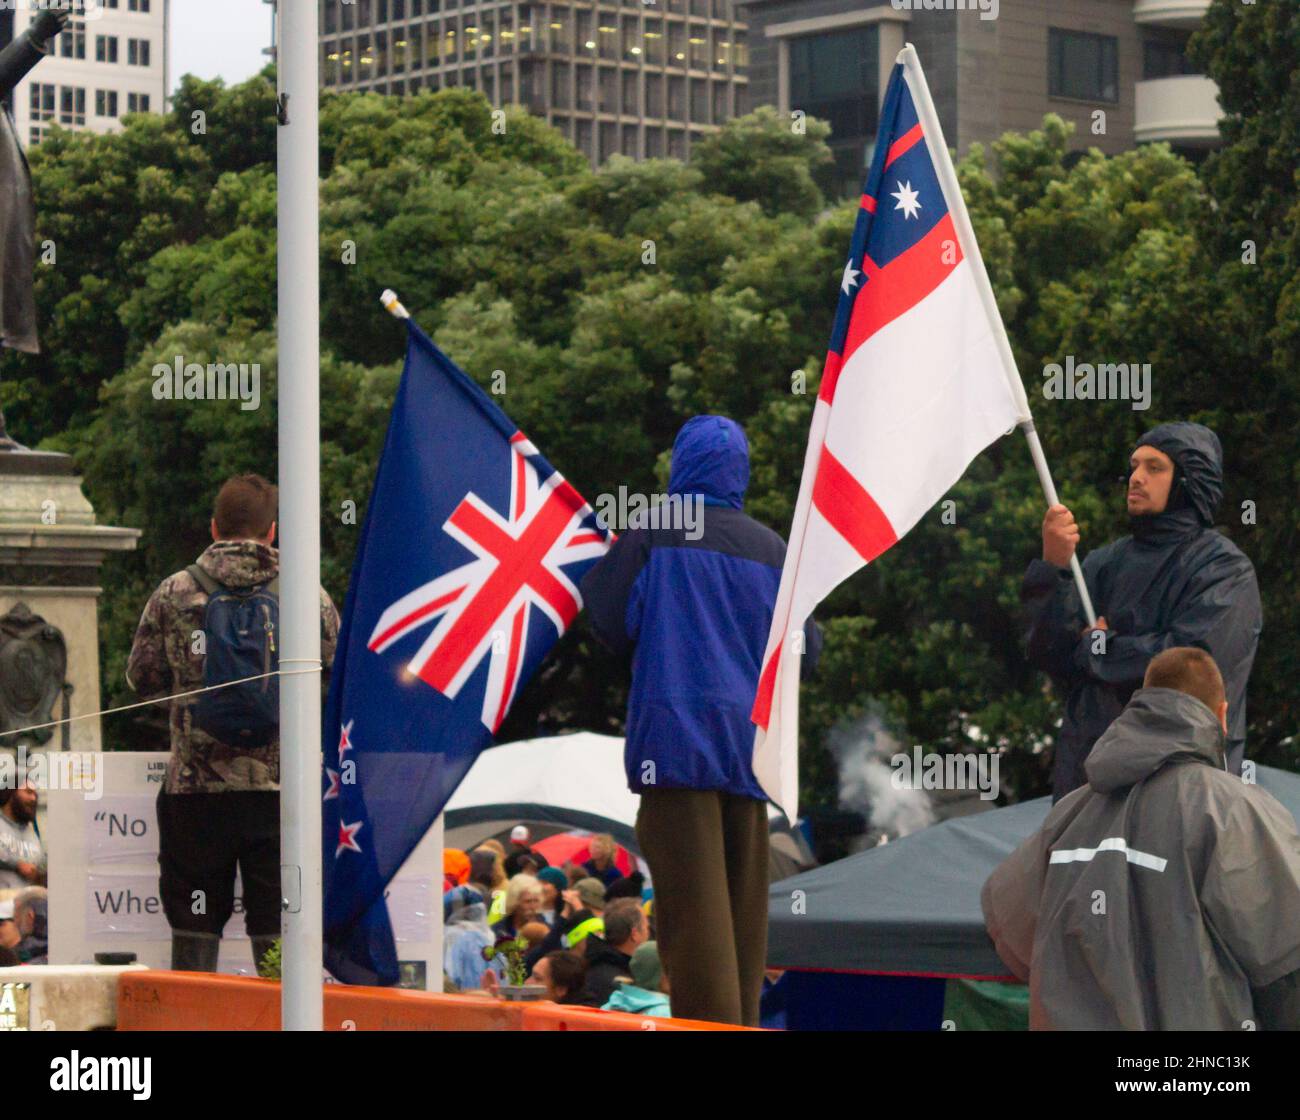 Wellington, New Zealand. February 13, 2022: Protestors hold up flags on the front line during the covid anti-mandate convoy protest and occupation of Stock Photo